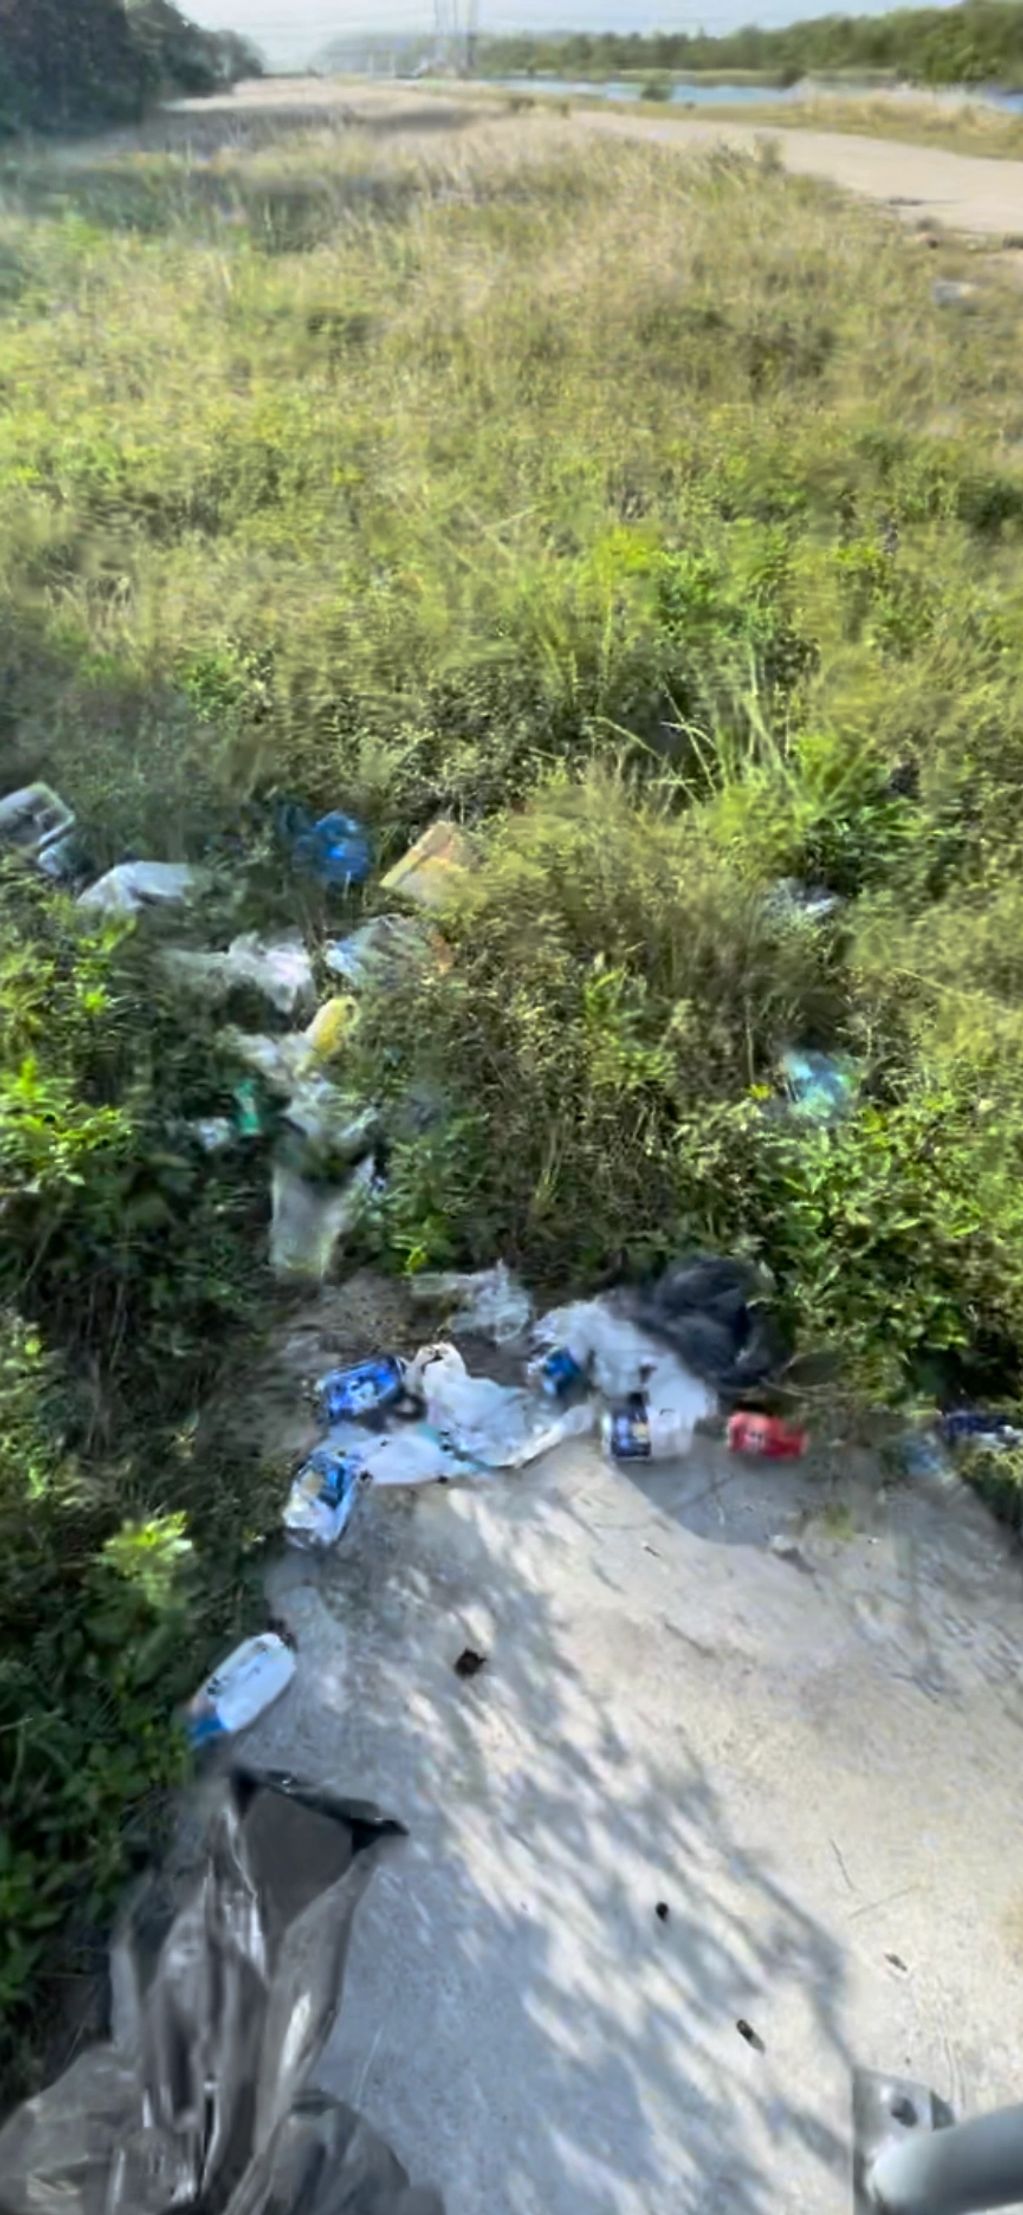 Trash overflowing from cans and scattered all over the grounds at Biscayne National Park FL 